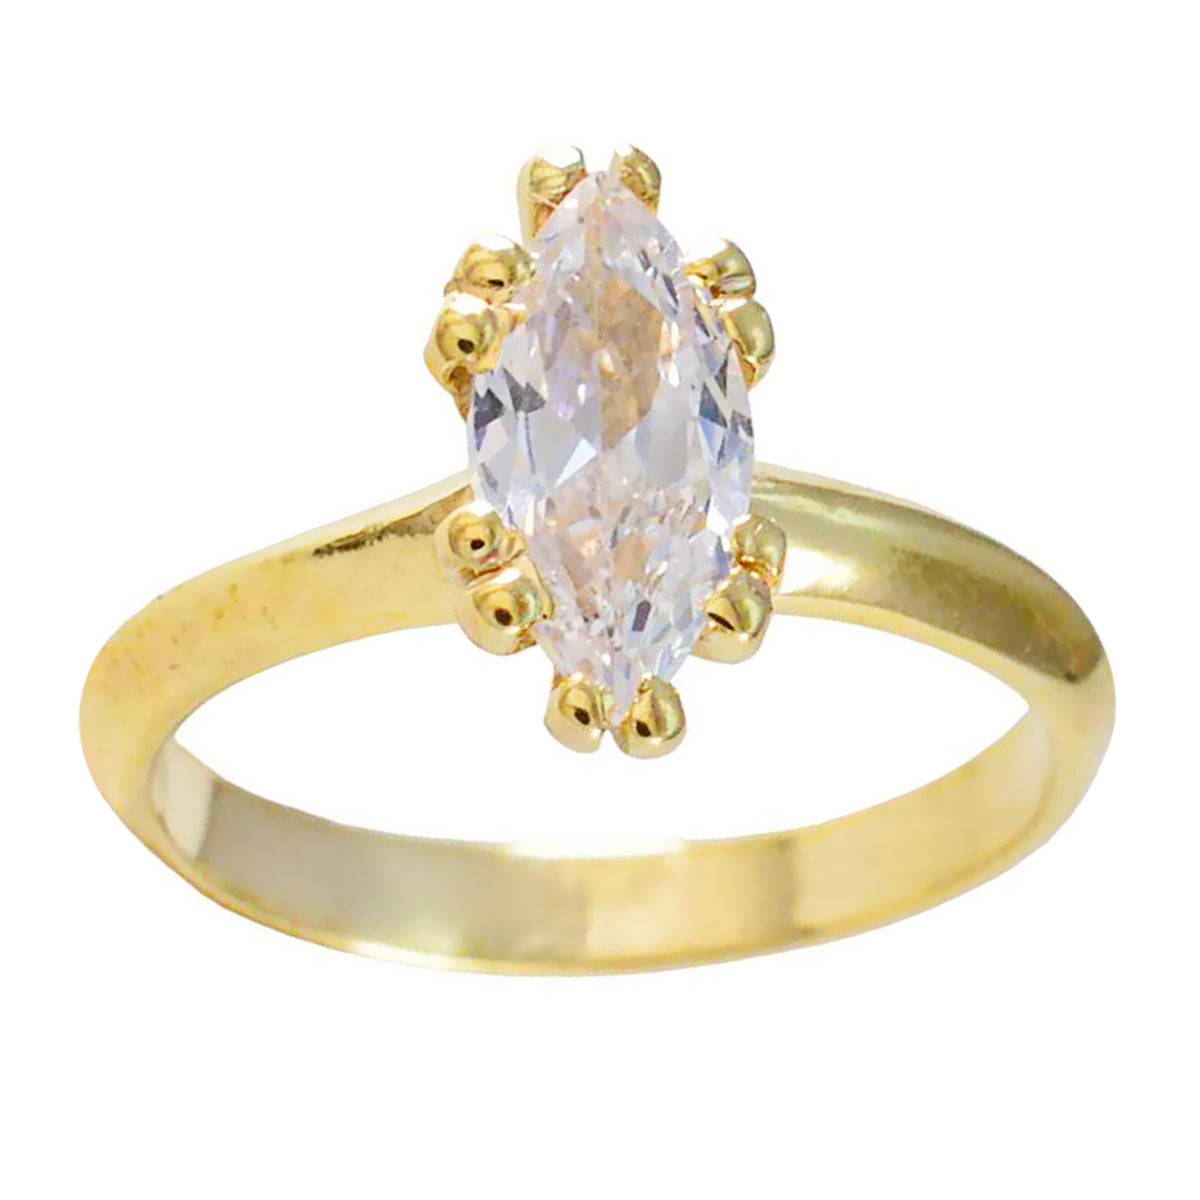 Riyo Excellent Silver Ring With Yellow Gold Plating White CZ Stone Marquise Shape Prong Setting Ring